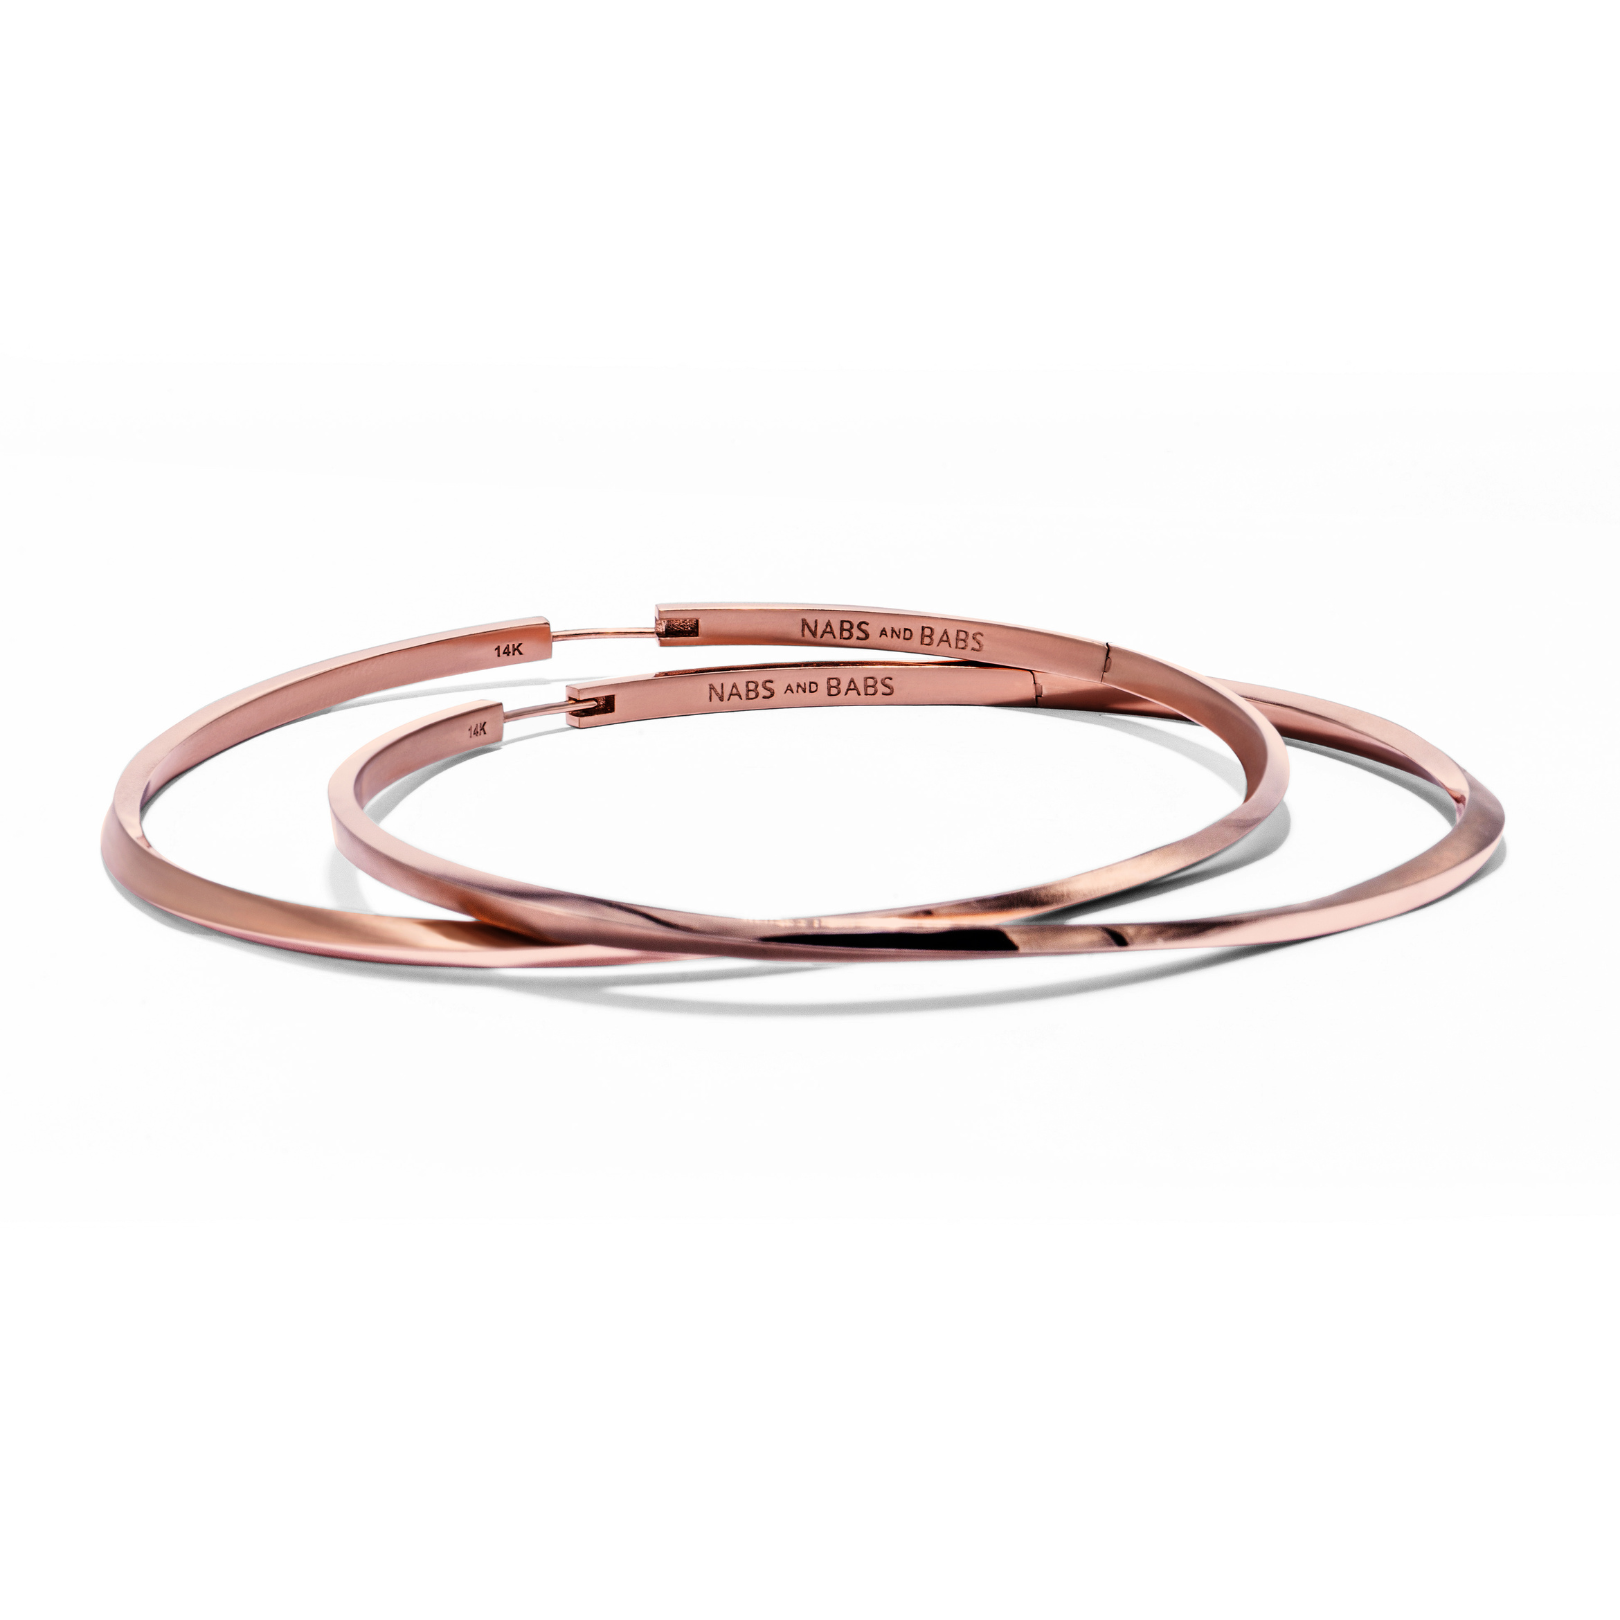 Lilo Hoops in 14K Rose Gold - Large